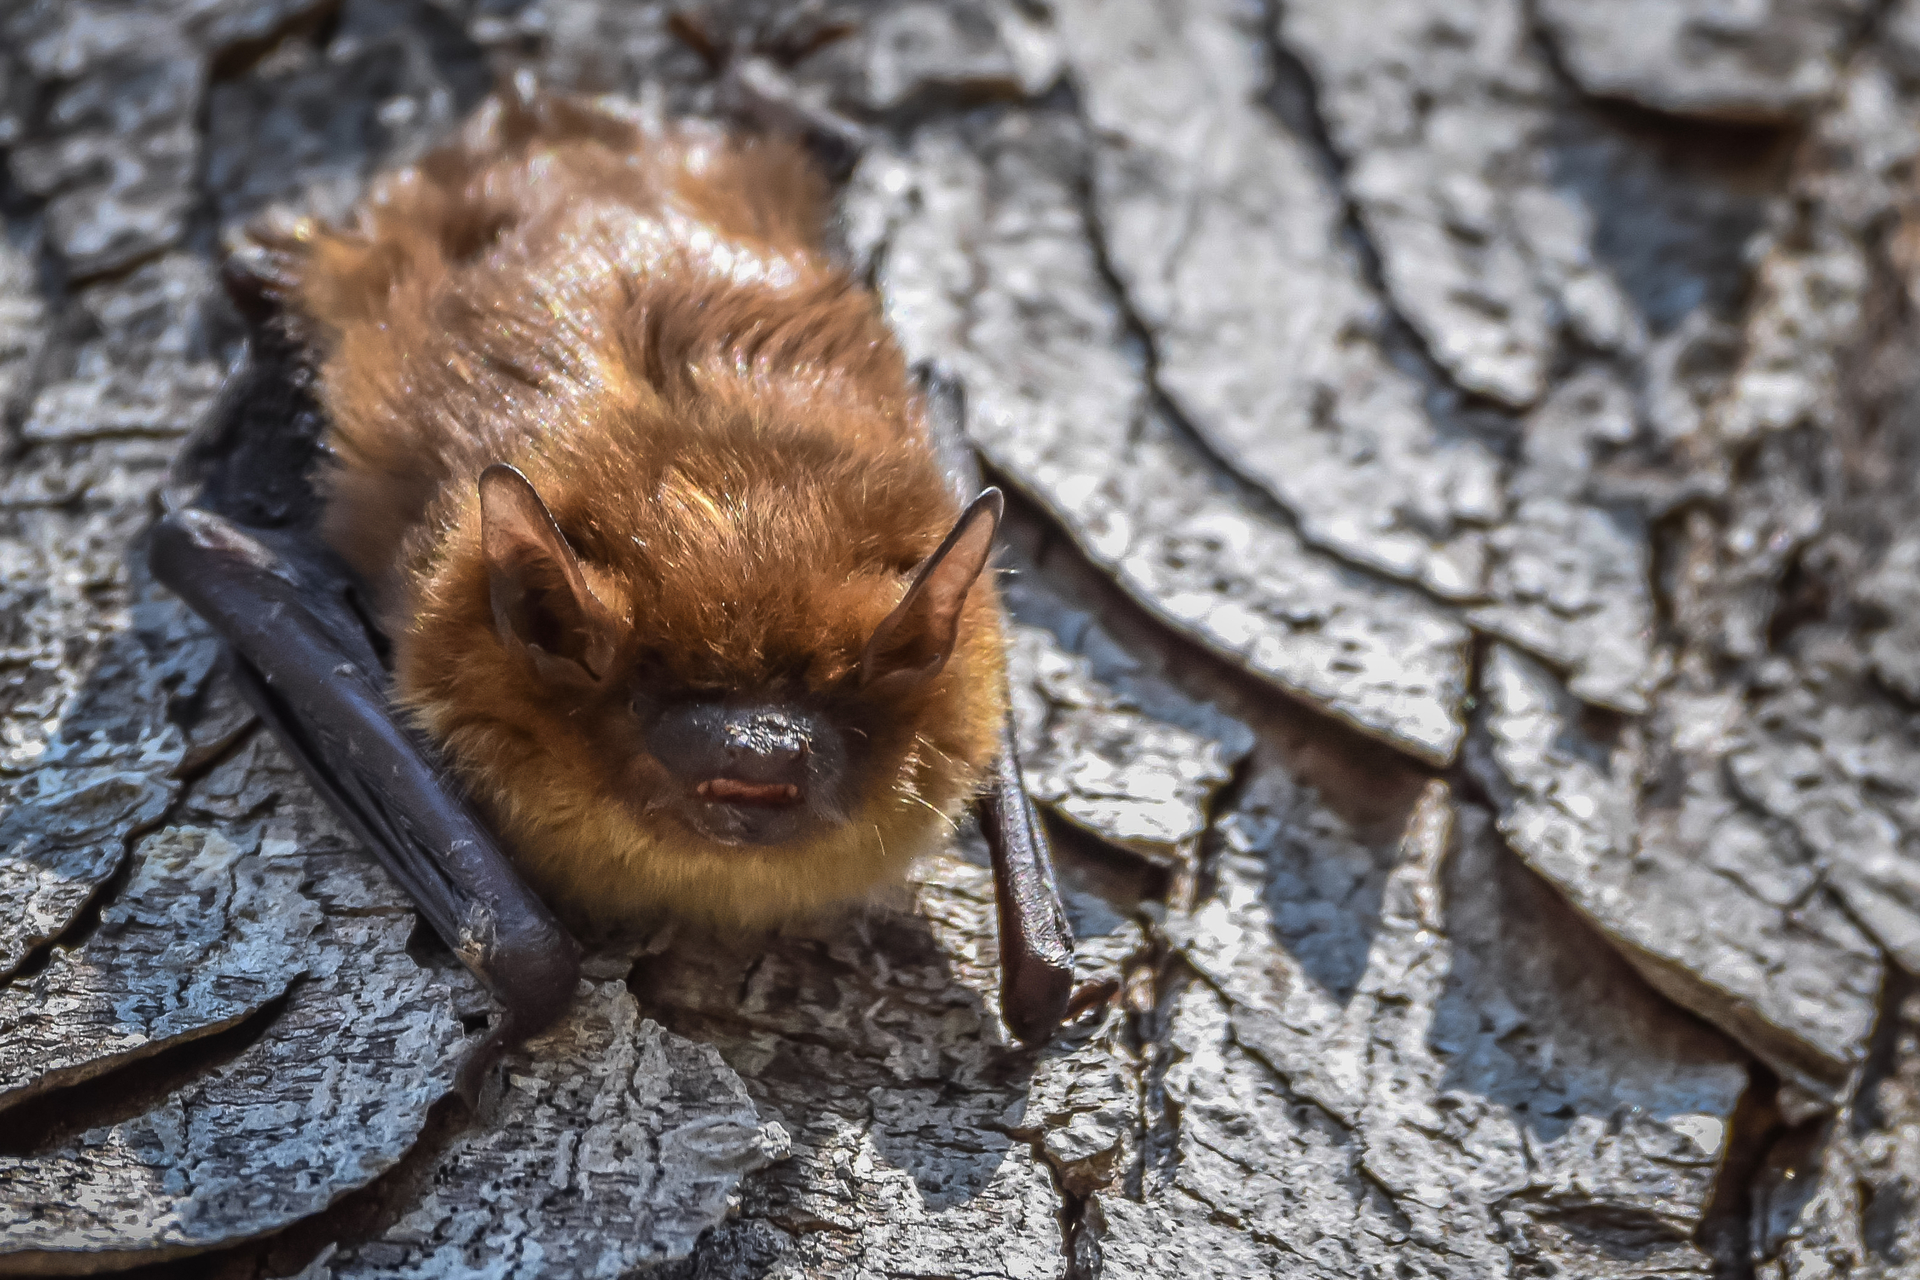 A bat with its wings tucked beneath it hanging from a tree.